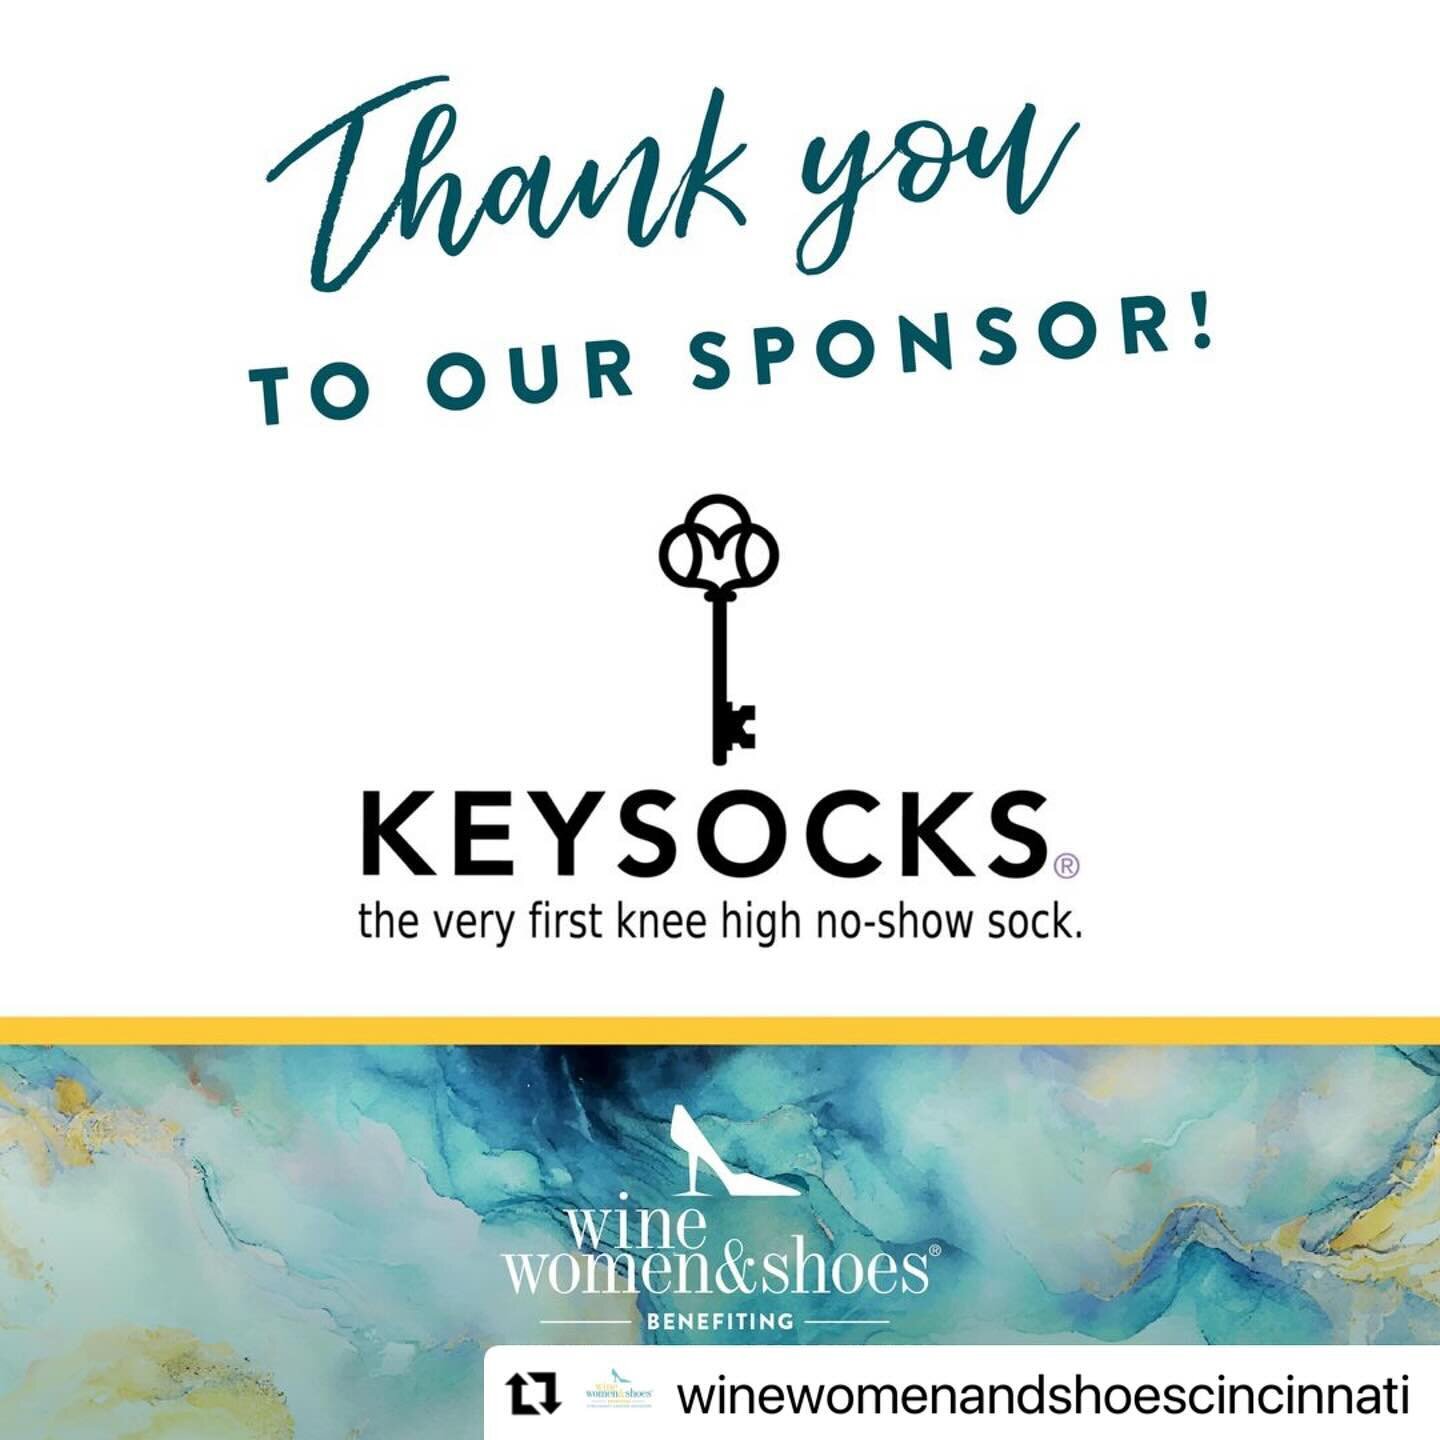 Save the Date! Wine Women &amp; Shoes Cincinnati returns 🍷💃🏽 👠 April 25, 2024

We are thrilled to be a sponsor again after such an amazing event last year! We feel that&nbsp; recognizing women around the world who are aspiring&nbsp;to reach their